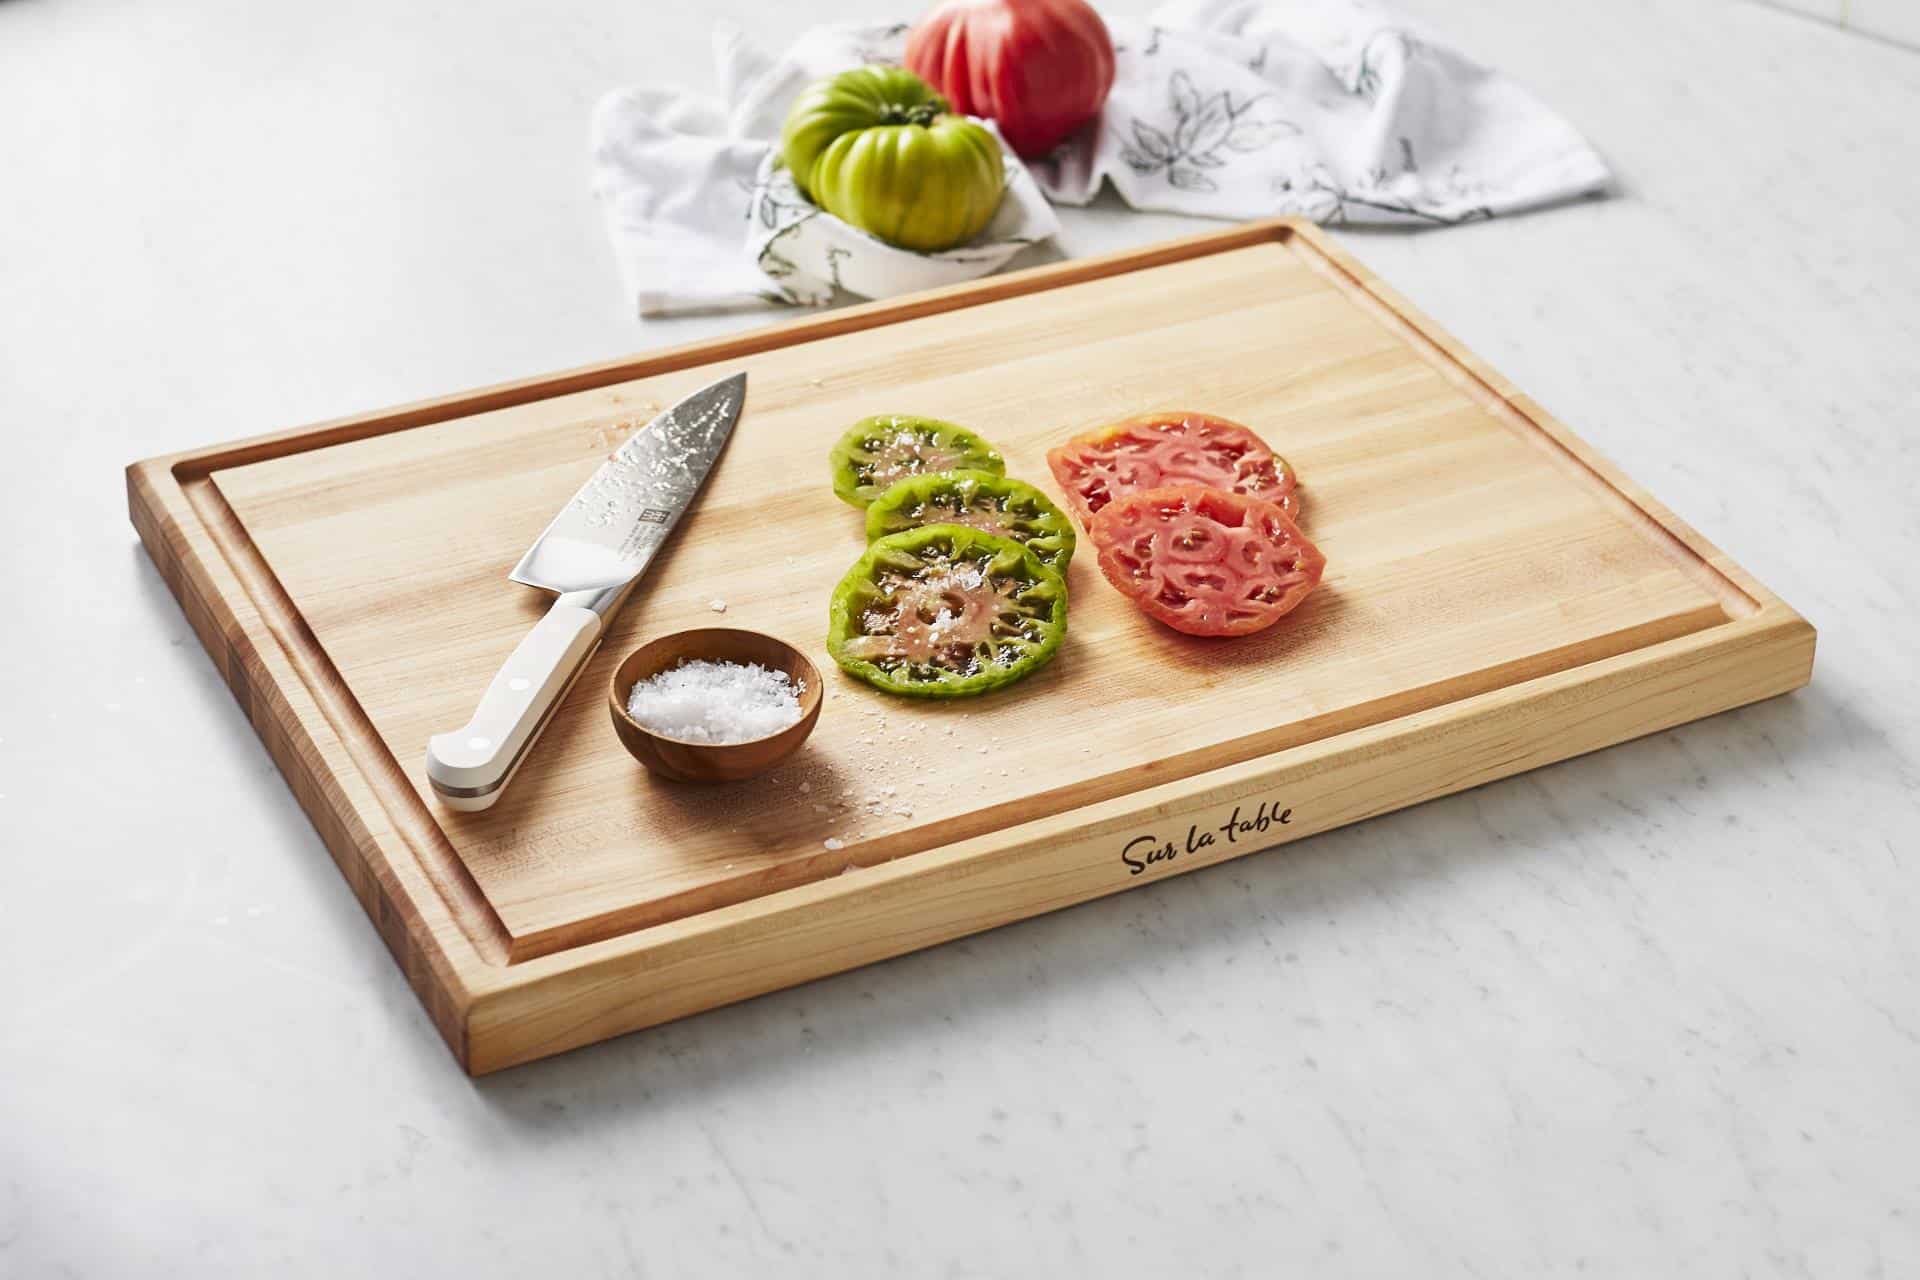 How To Clean (And Sanitize) Your Wooden Cutting Boards